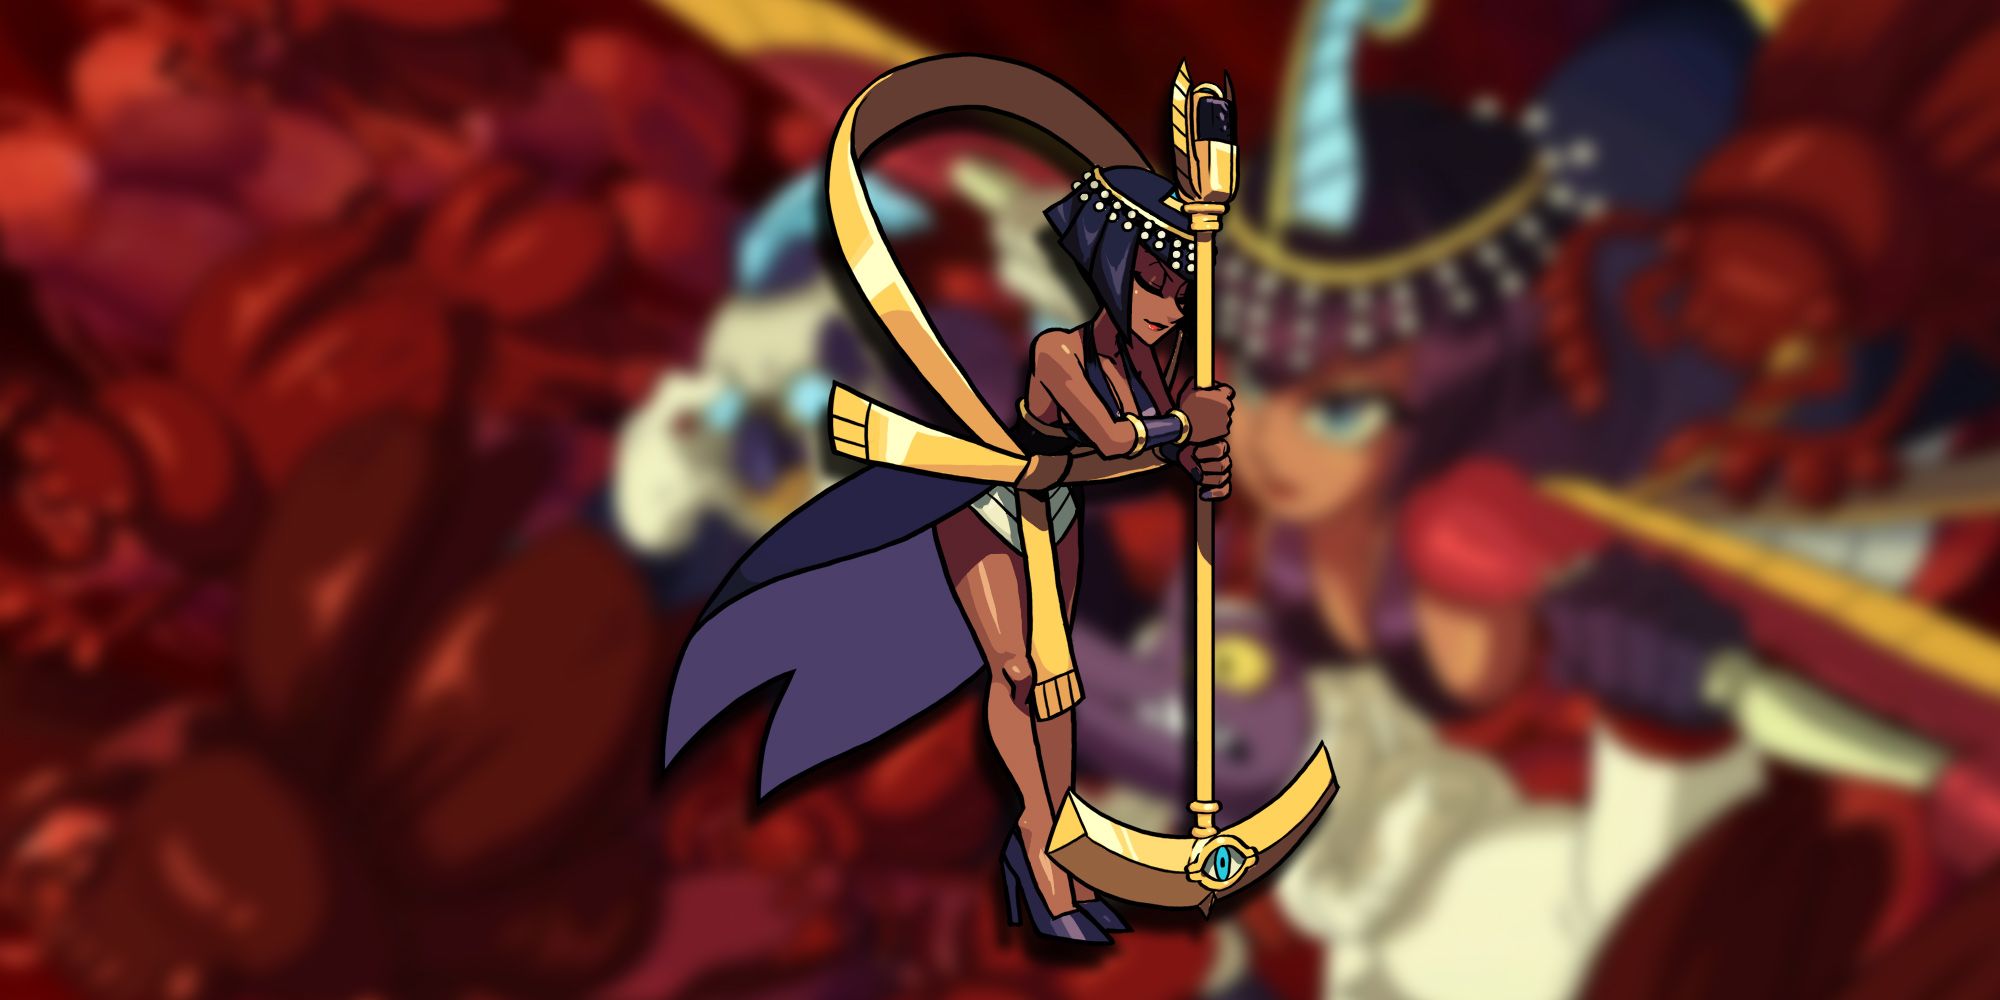 PNG Of Eliza From Skullgirls Posing With Her Microphone And Staff Overlaid On Image From Her Story Mode In-Game